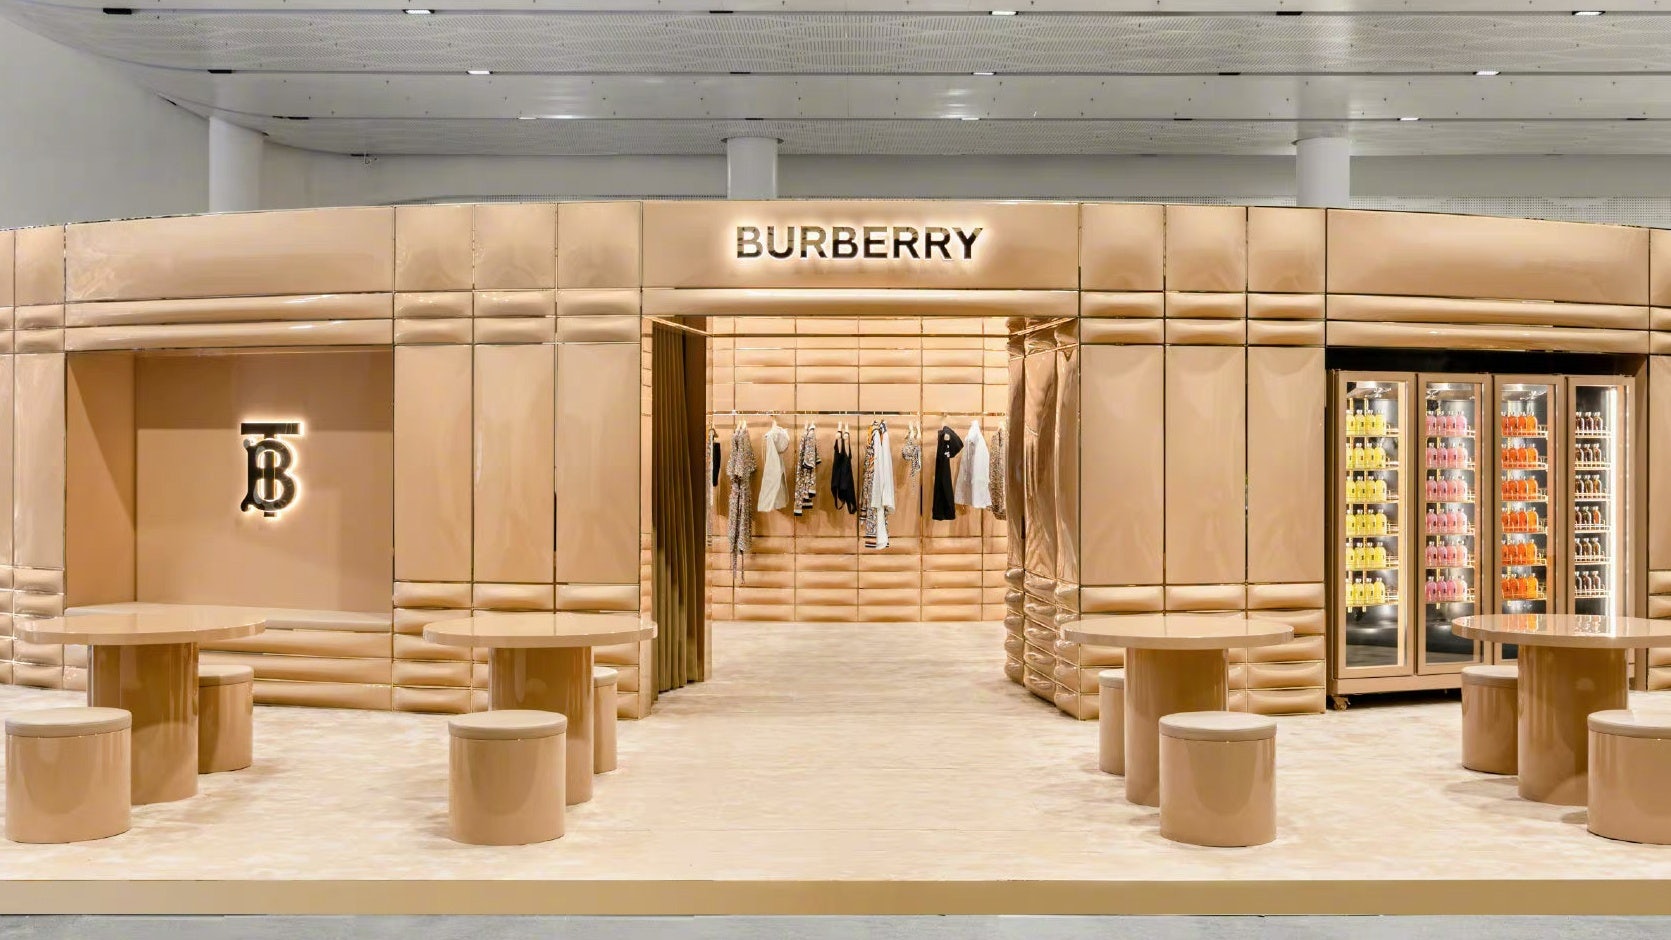 Luxury brands in the fashion, beauty, wine, and spirits categories — from Burberry to Estée Lauder — showed up for the second China International Consumer Expo in Hainan in 2022. Photo: Burberry